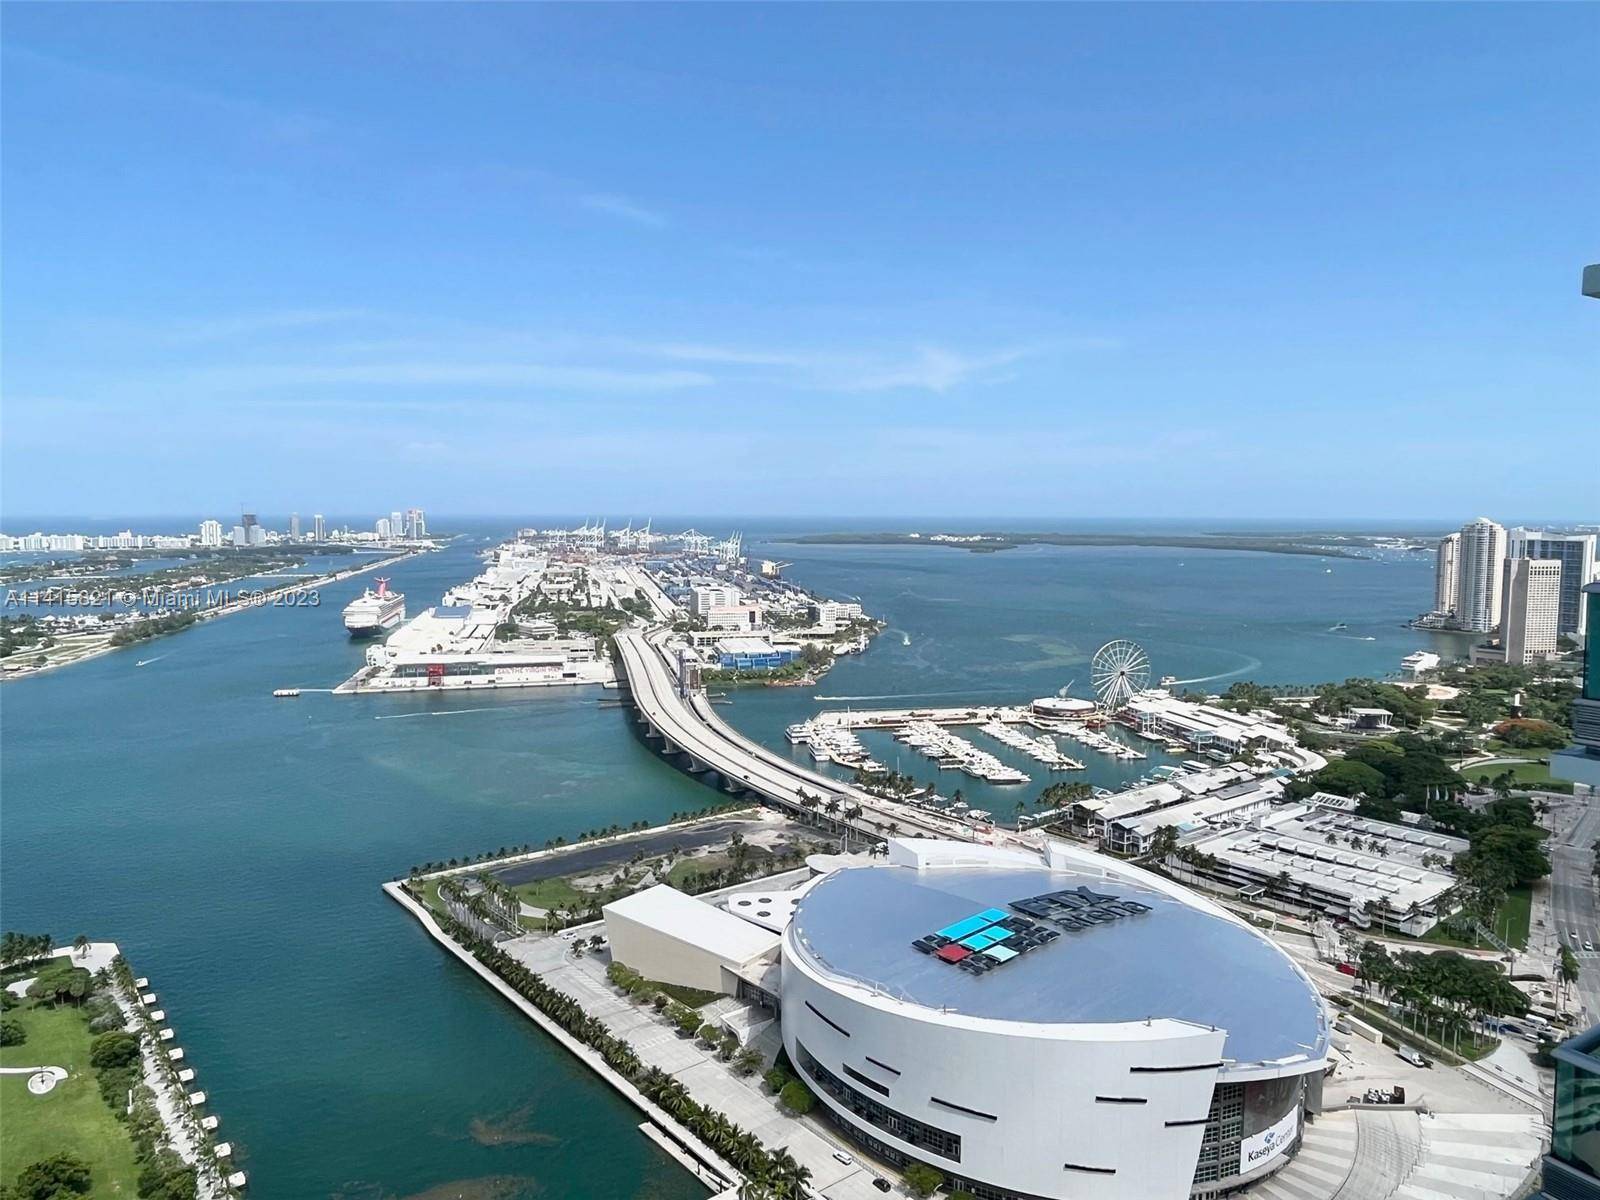 Experience the breathtaking vistas from this 2 bedroom plus den, 3 bathroom apartment at the prestigious 900 Biscayne building, located in the heart of Downtown Miami.